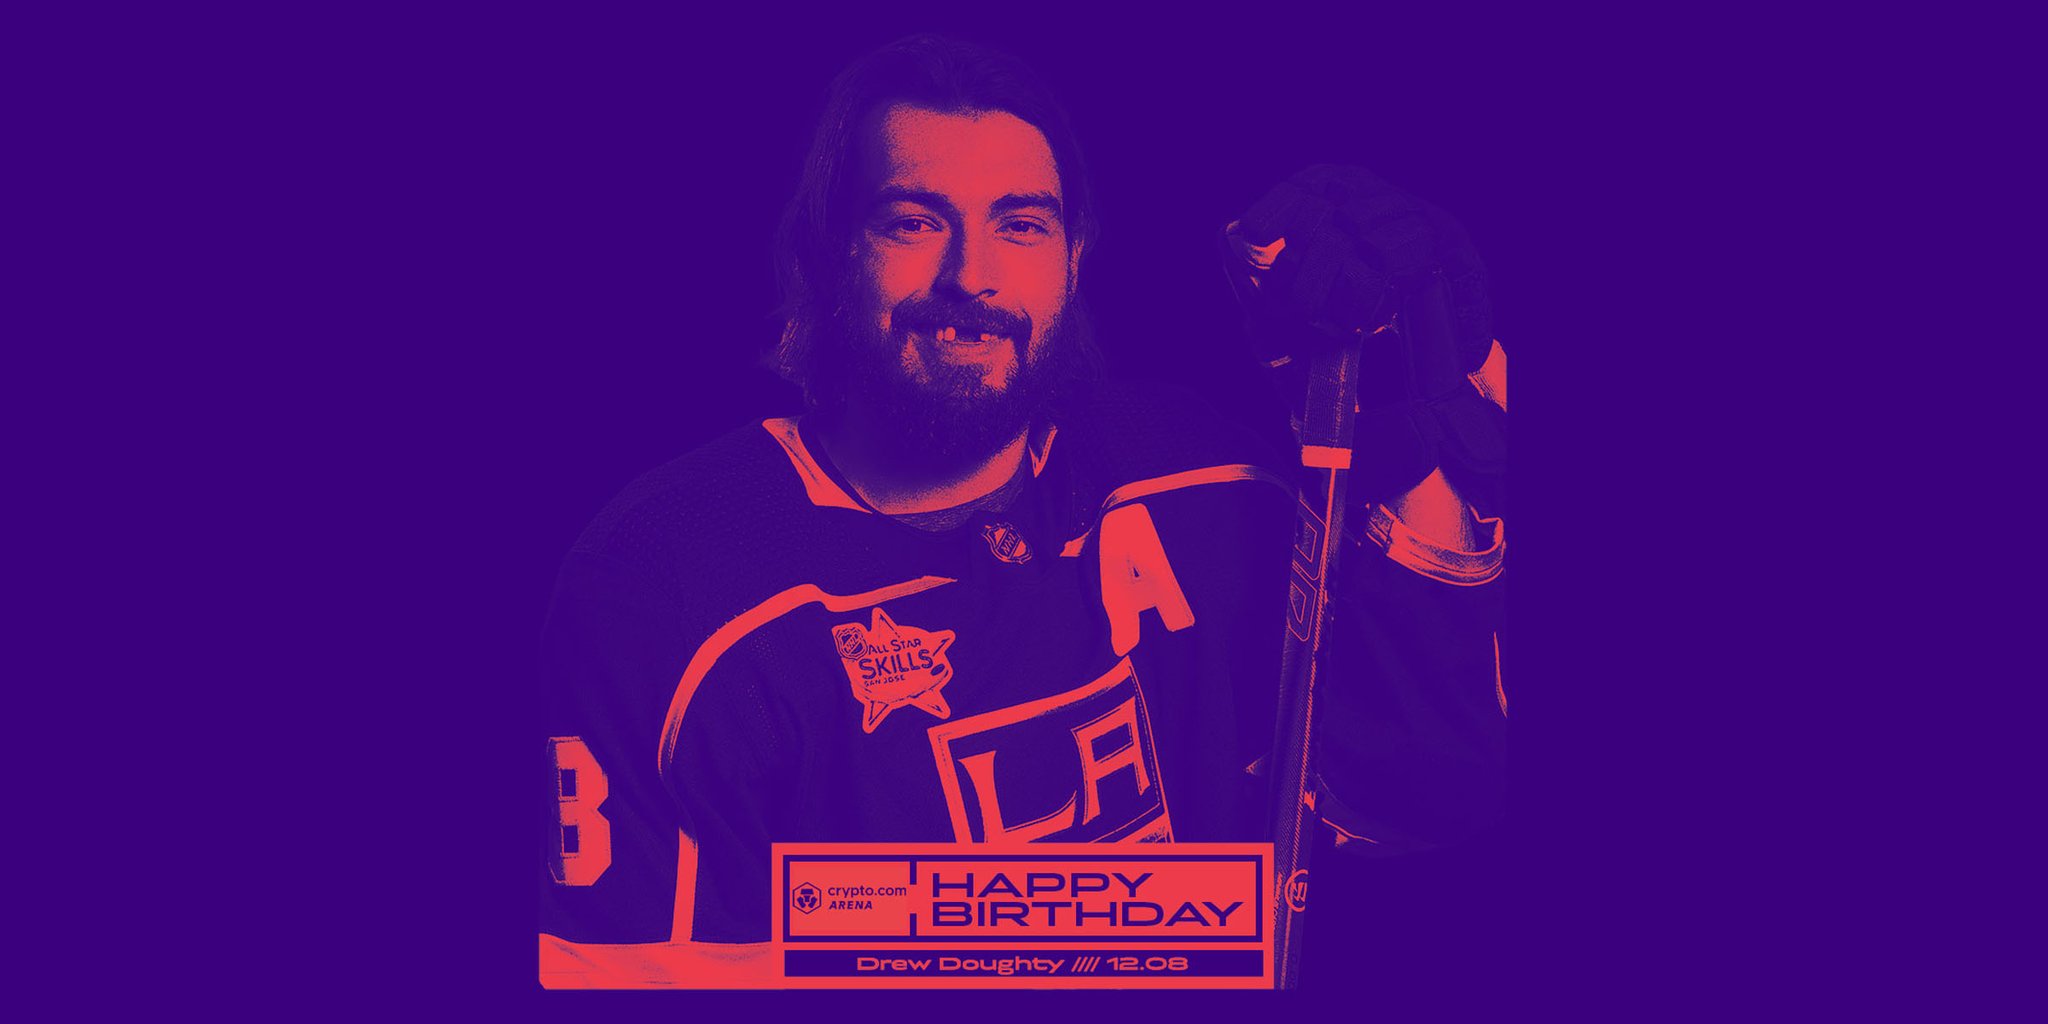 Something we can all agree on: Drew Doughty has the best smile Wishing a very happy birthday!  